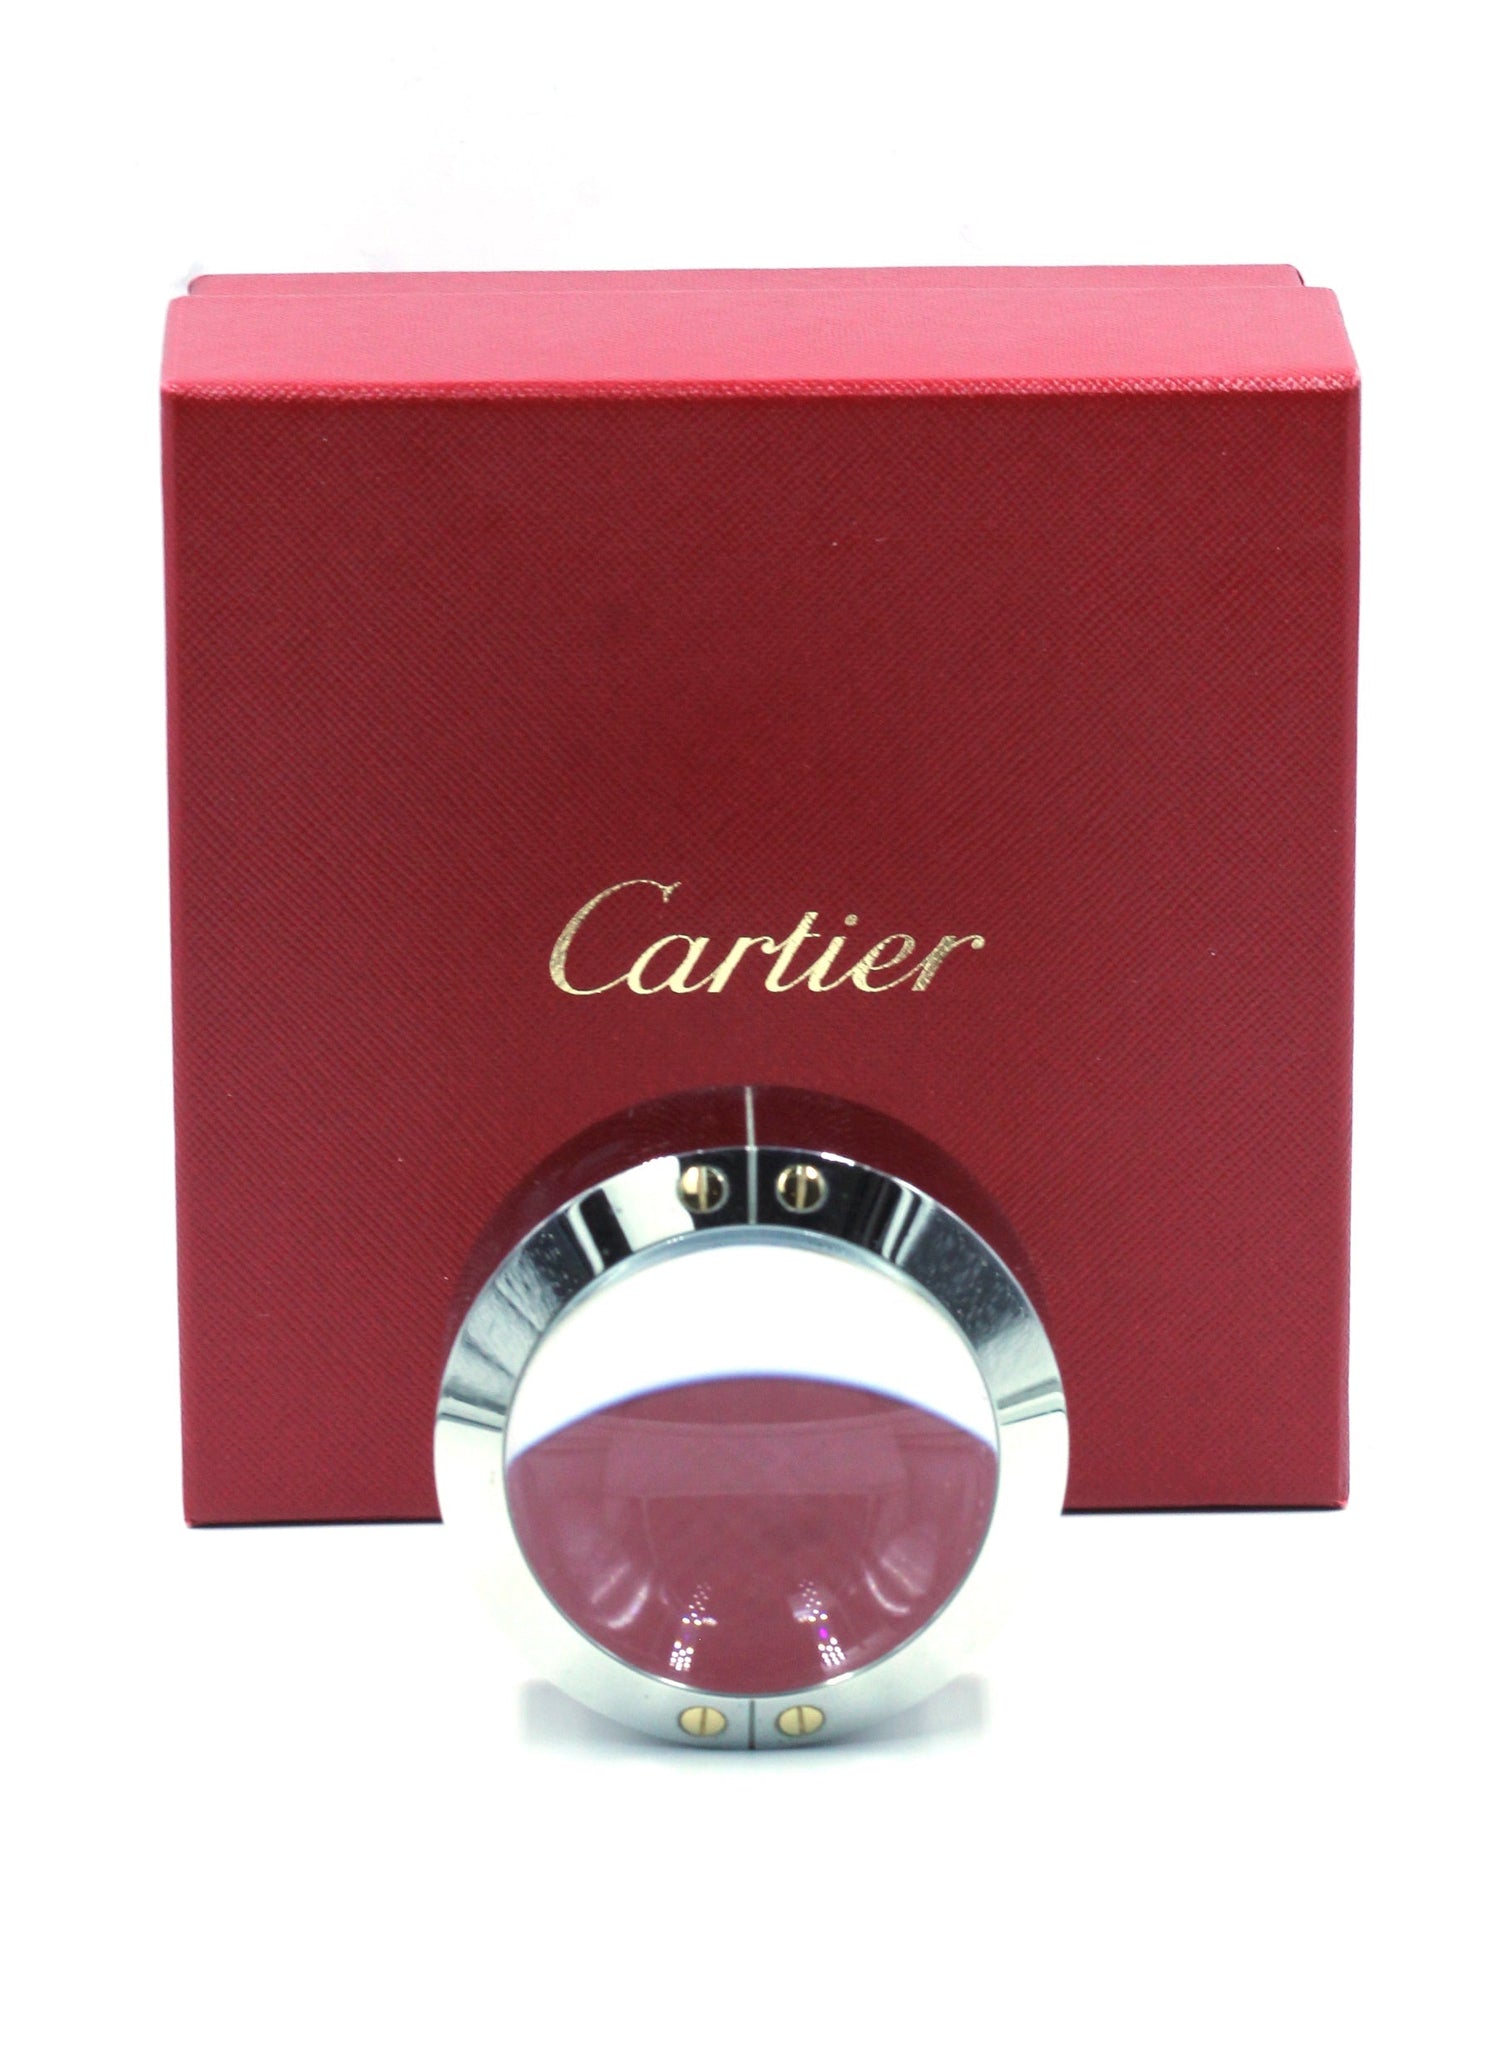 Pre-Owned Cartier Magnifying Glass, SALE